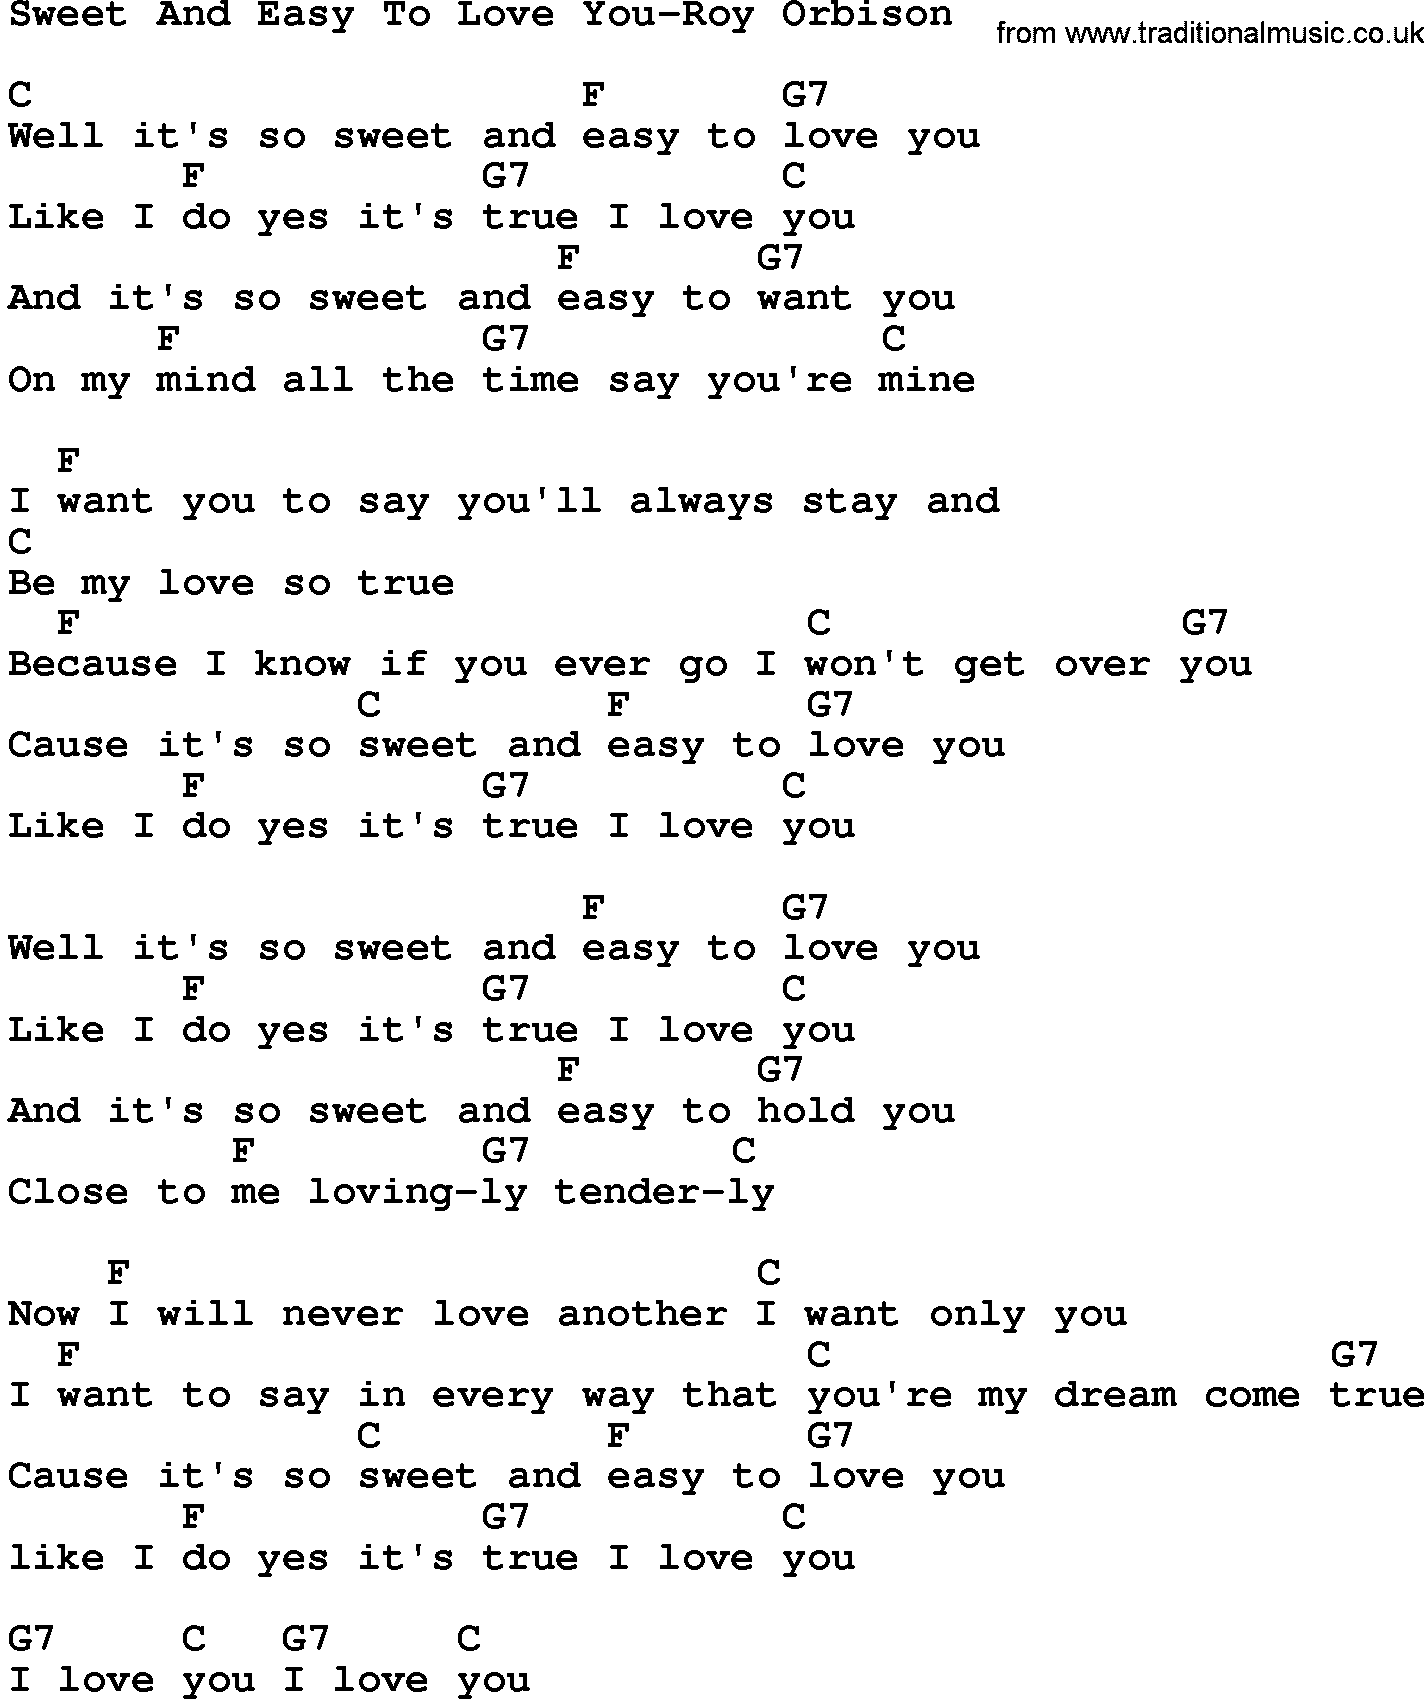 Country music song: Sweet And Easy To Love You-Roy Orbison lyrics and chords